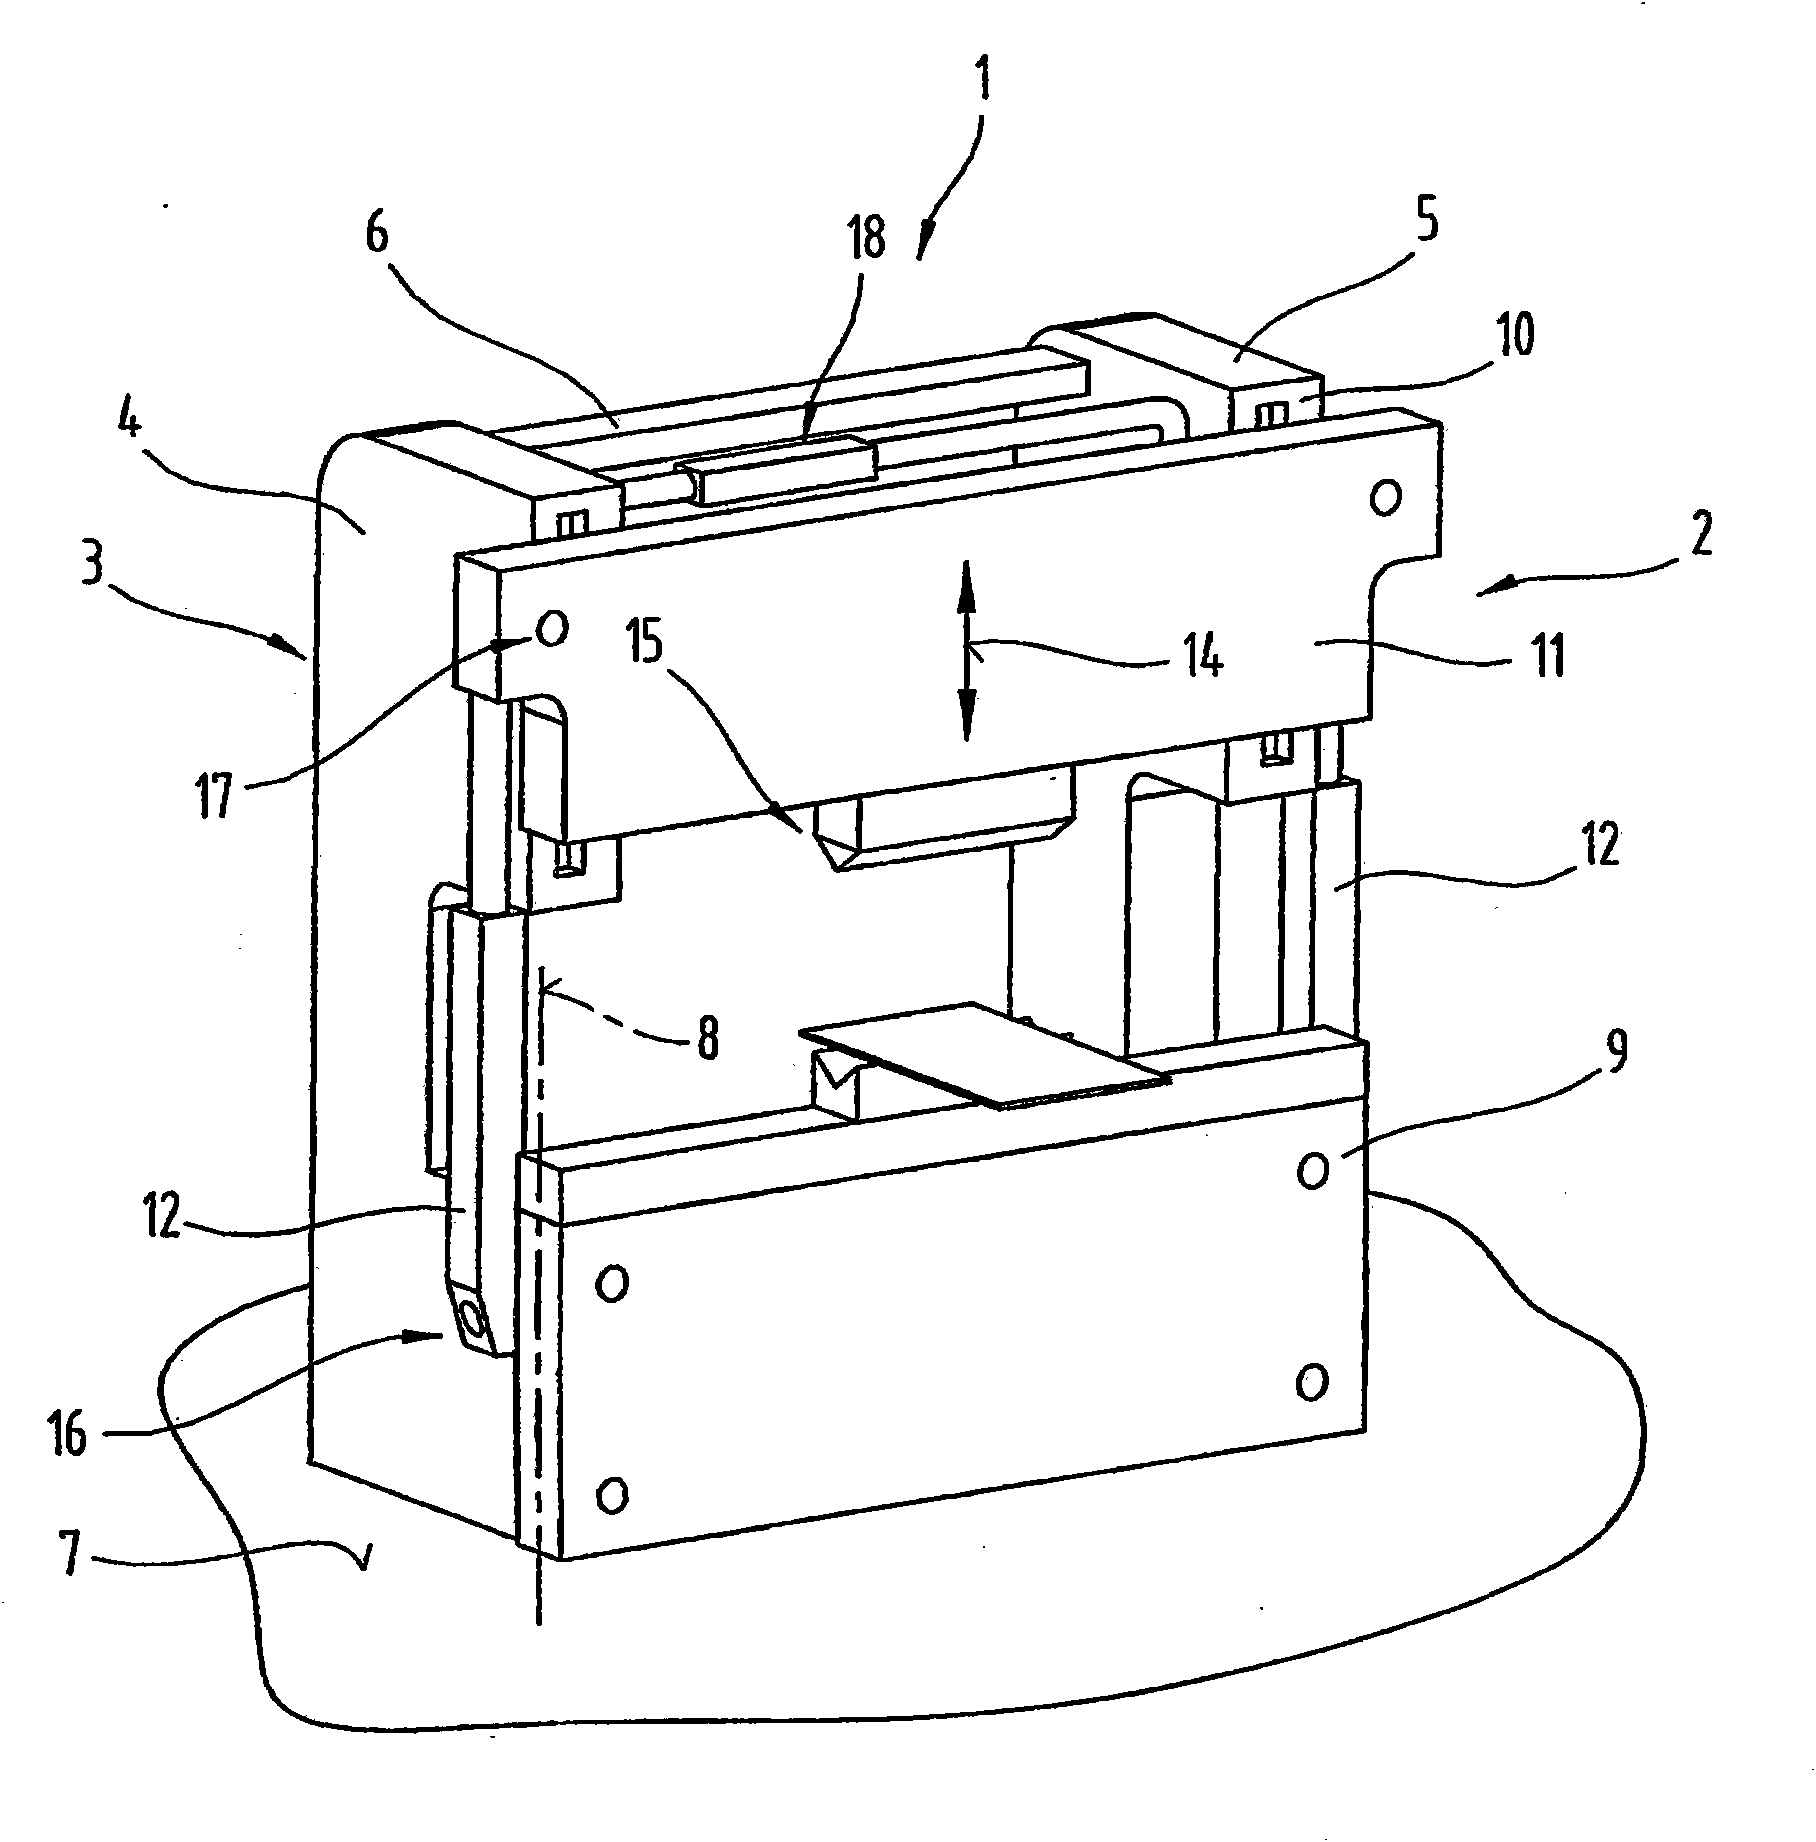 Drive device for a bending press